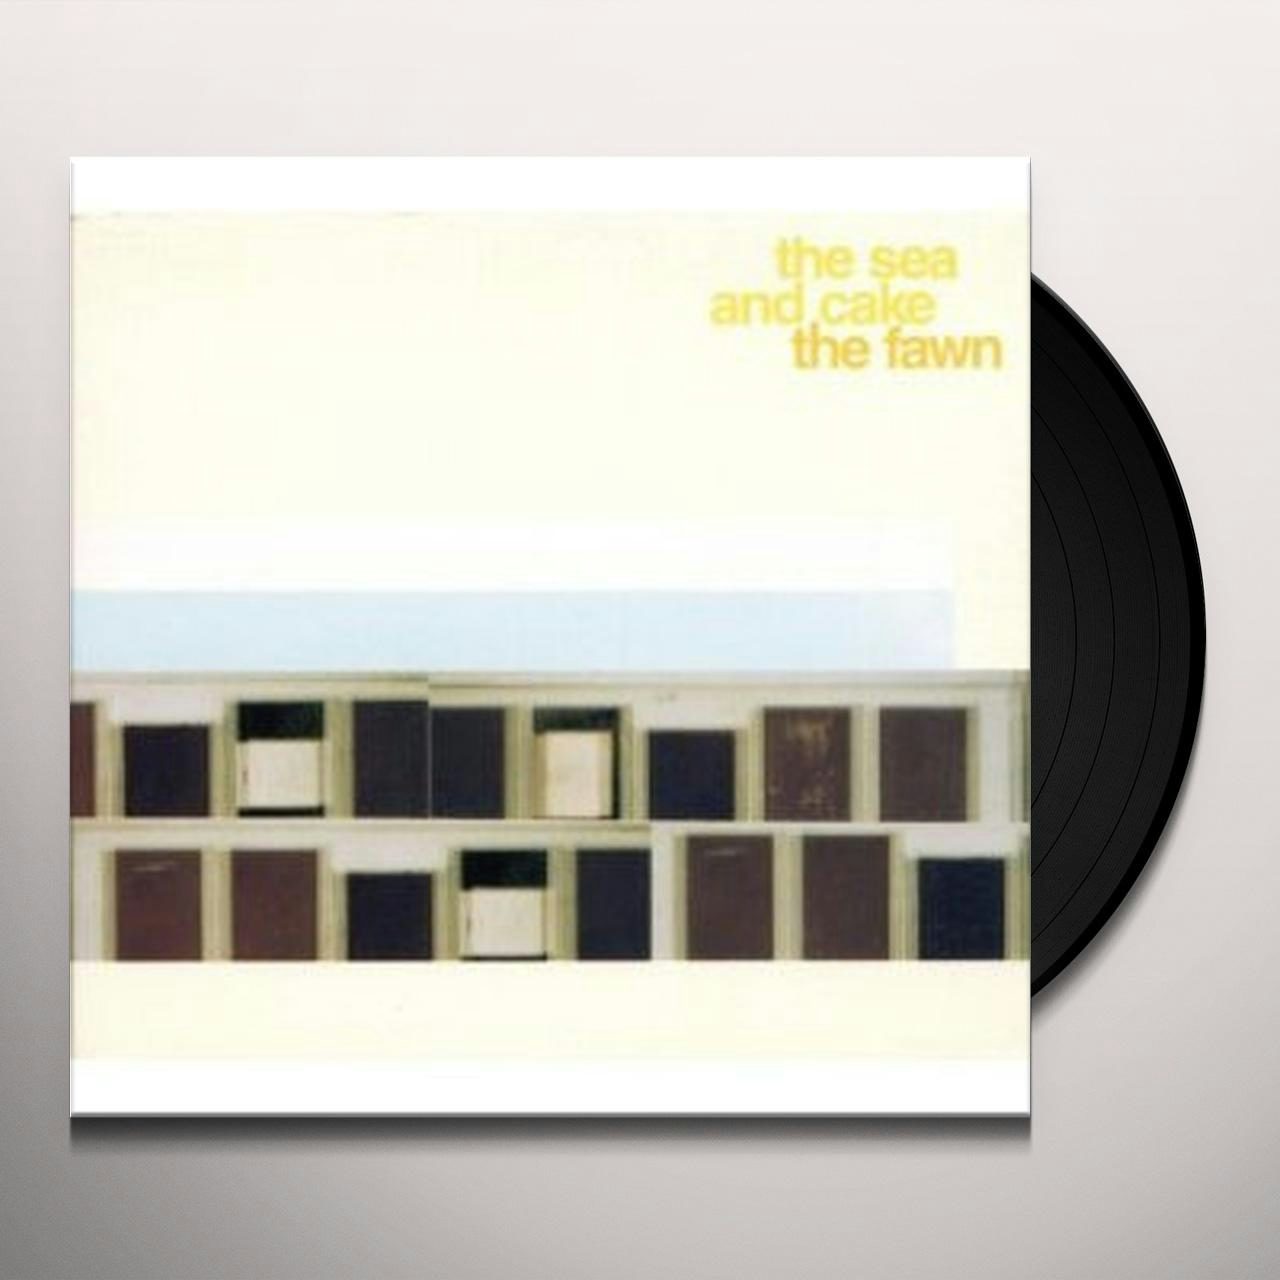 The Sea and Cake FAWN Vinyl Record